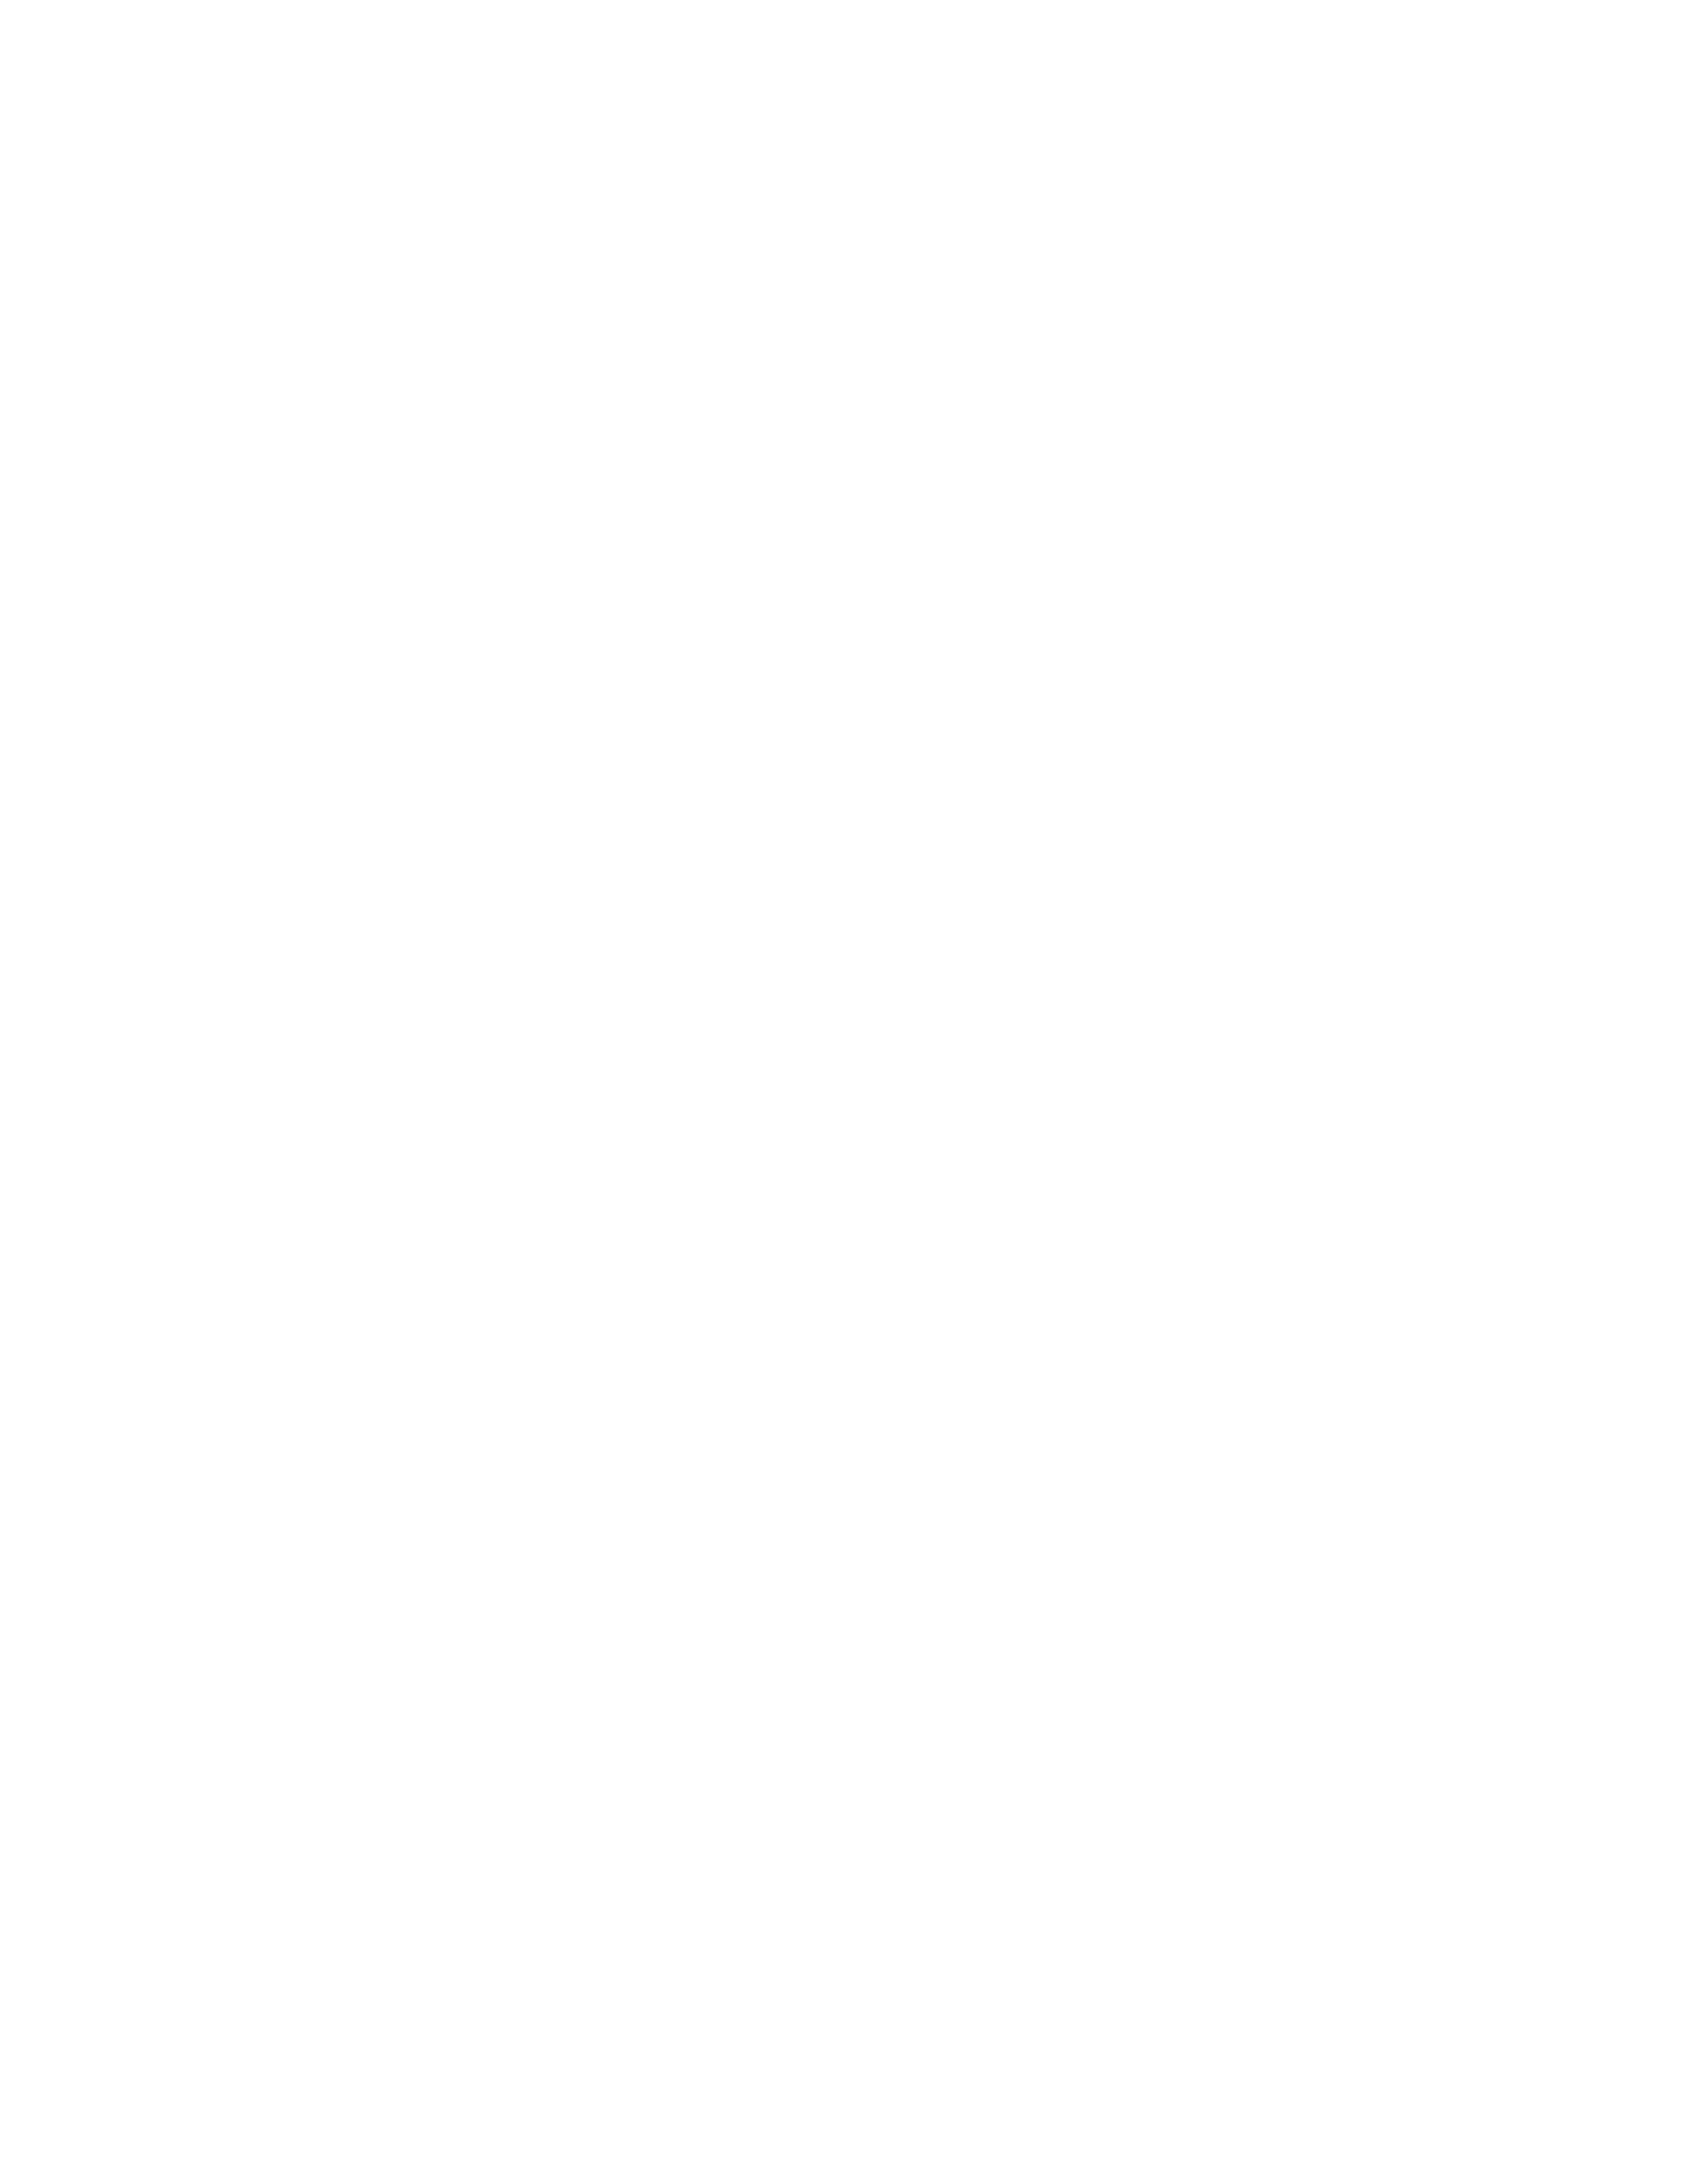 Enter the giveaway